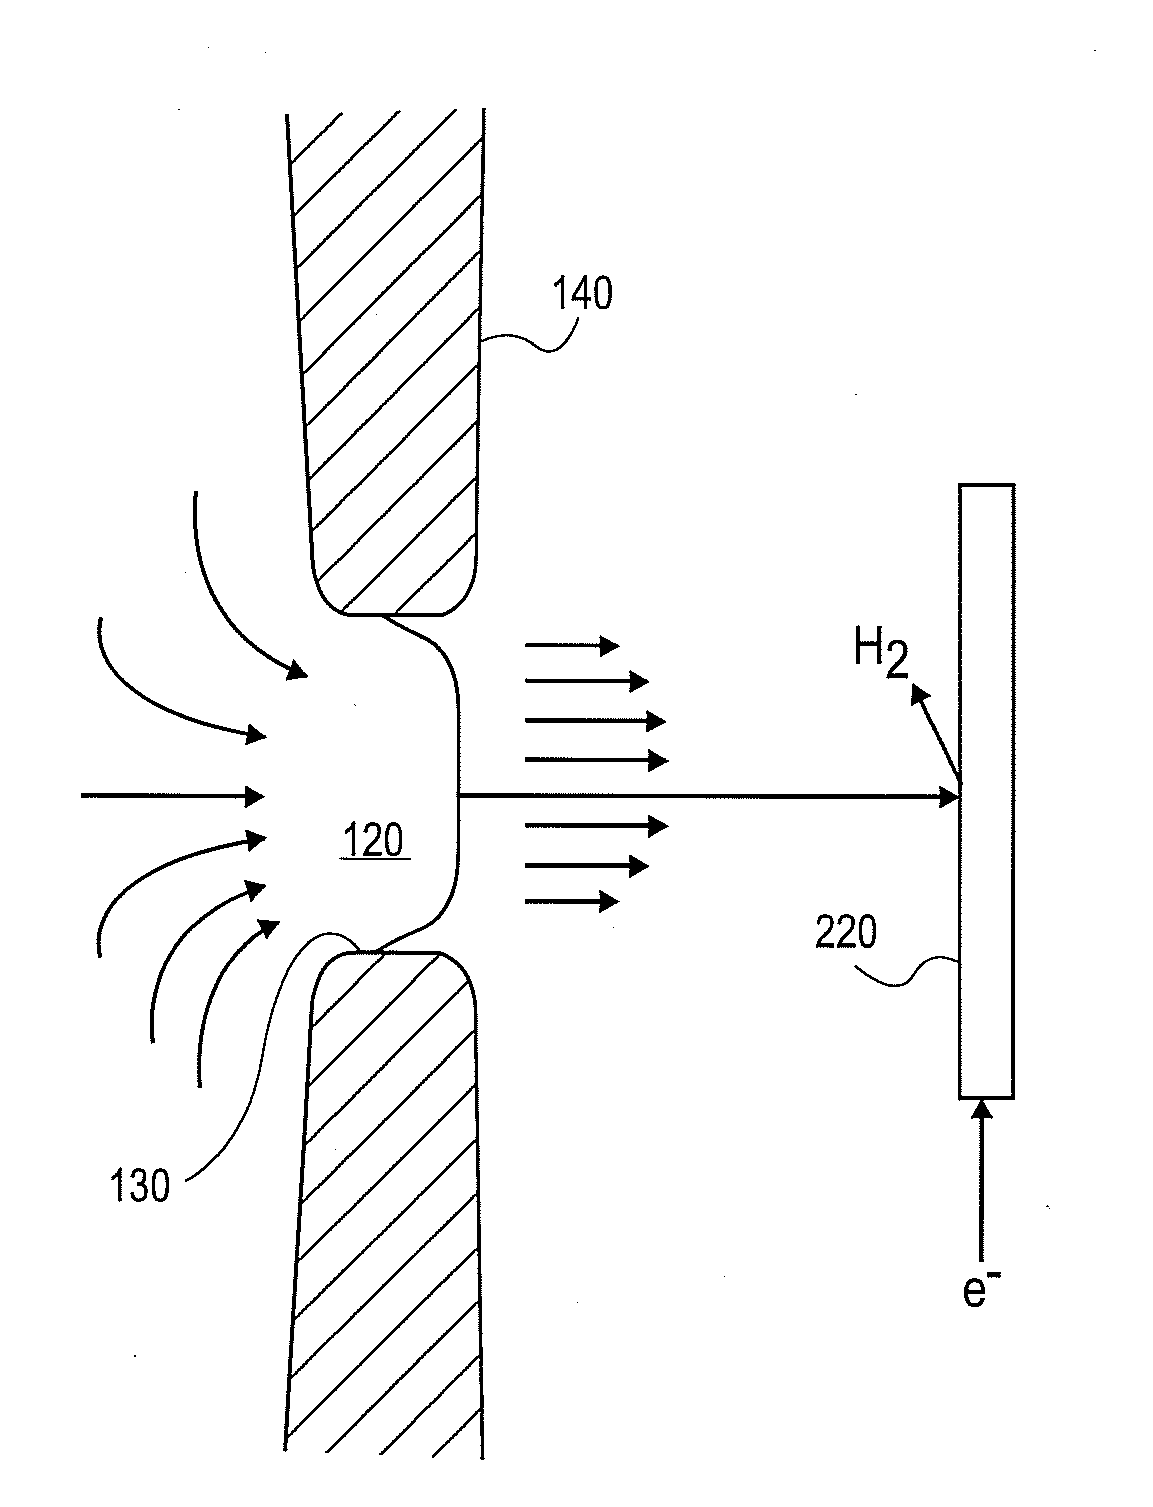 Method and apparatus for electrokinetic co-generation of hydrogen and electric power from liquid water microjets